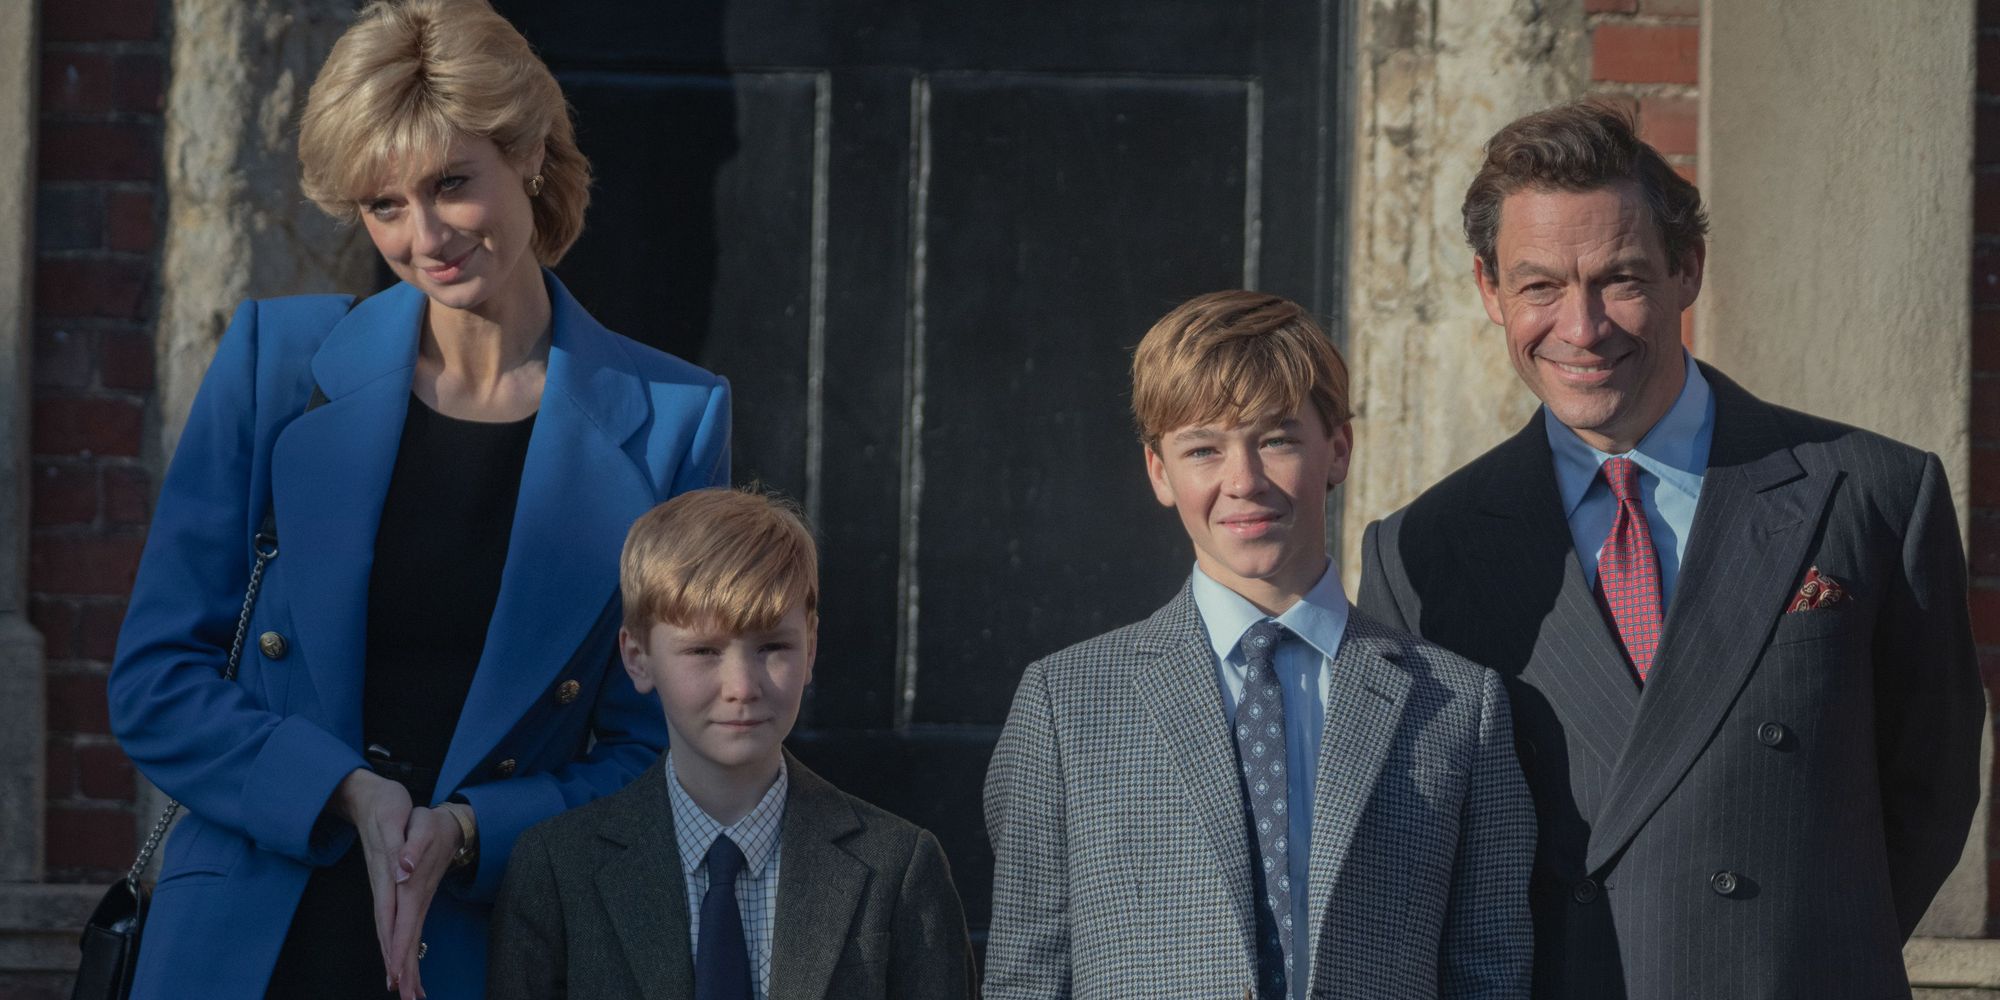 Royal family in front of a doorway looking straight at the camera.